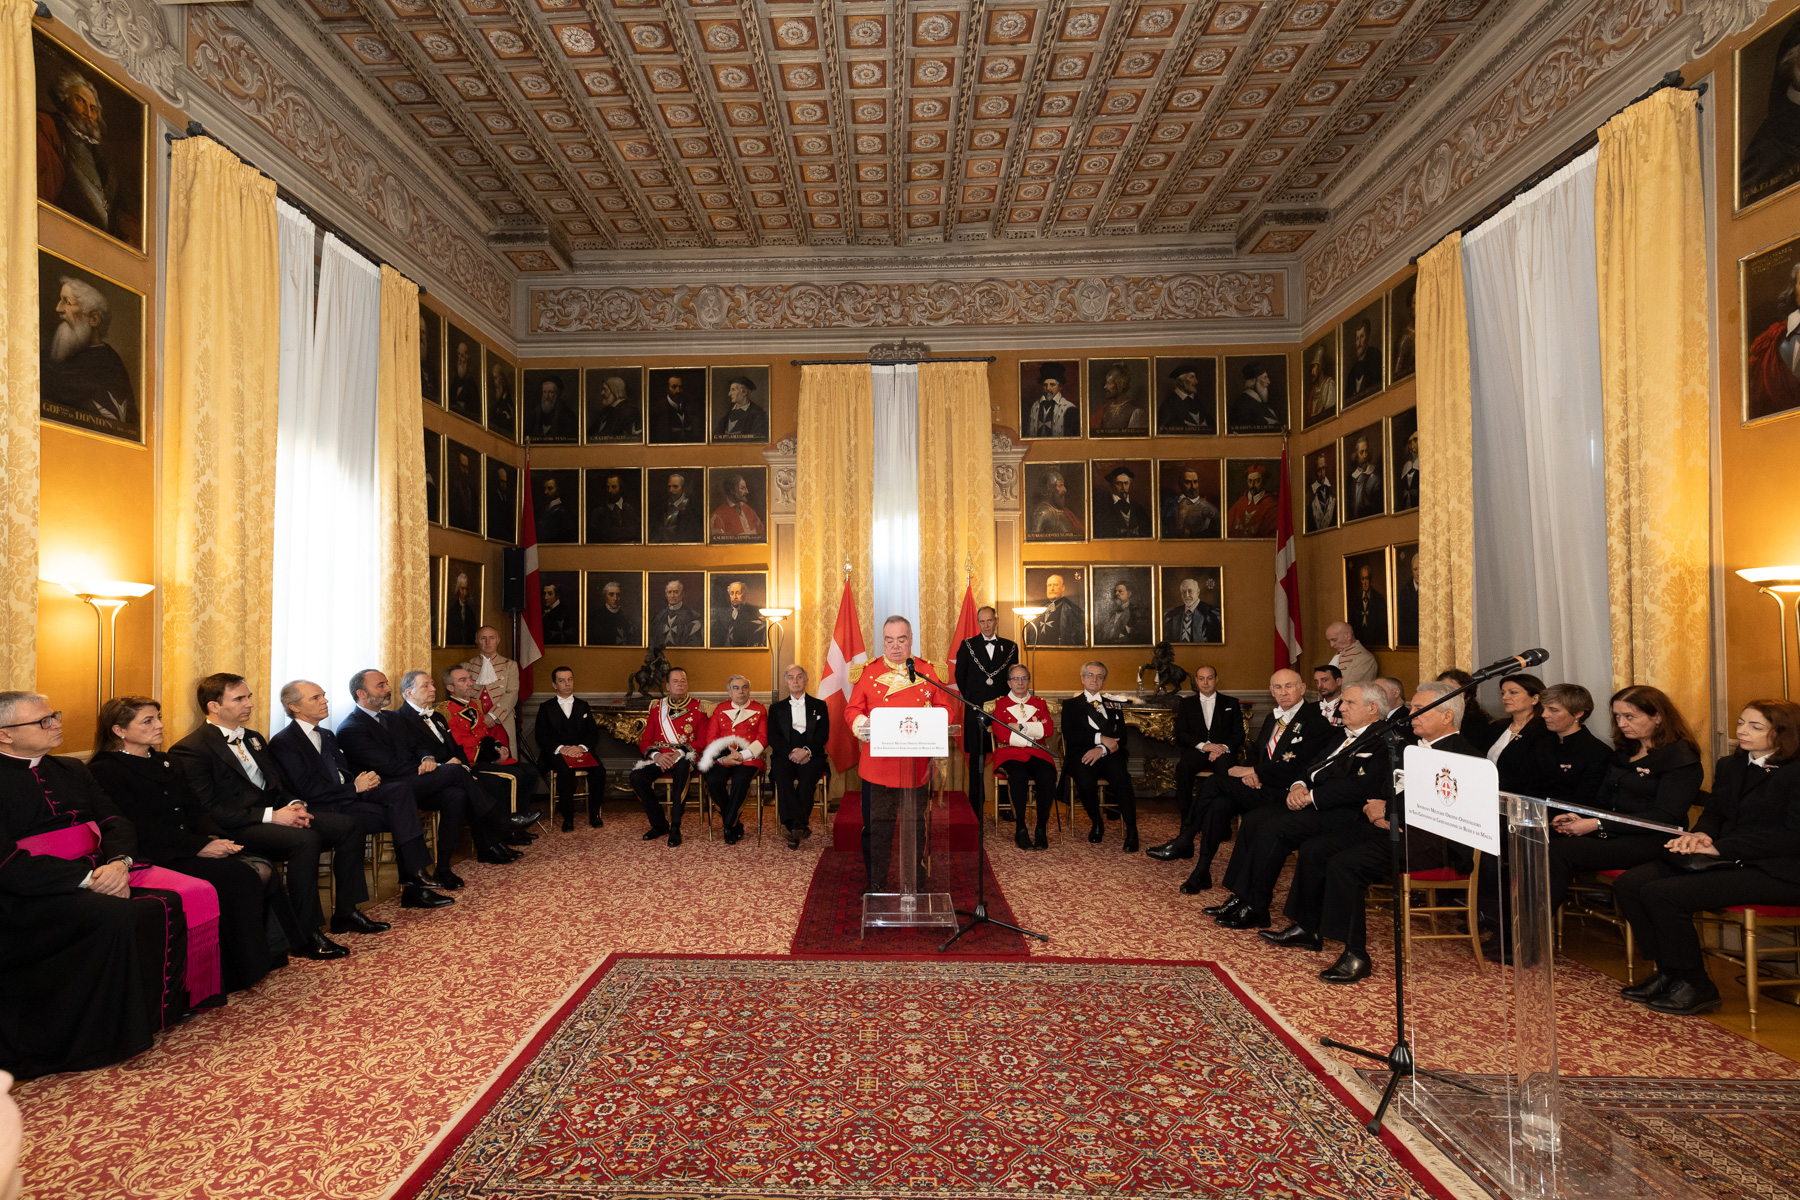 Speech of the Lieutenant of the Grand Master Fra’ John T. Dunlap to the Diplomatic Corps accredited to the Sovereign Order of Malta